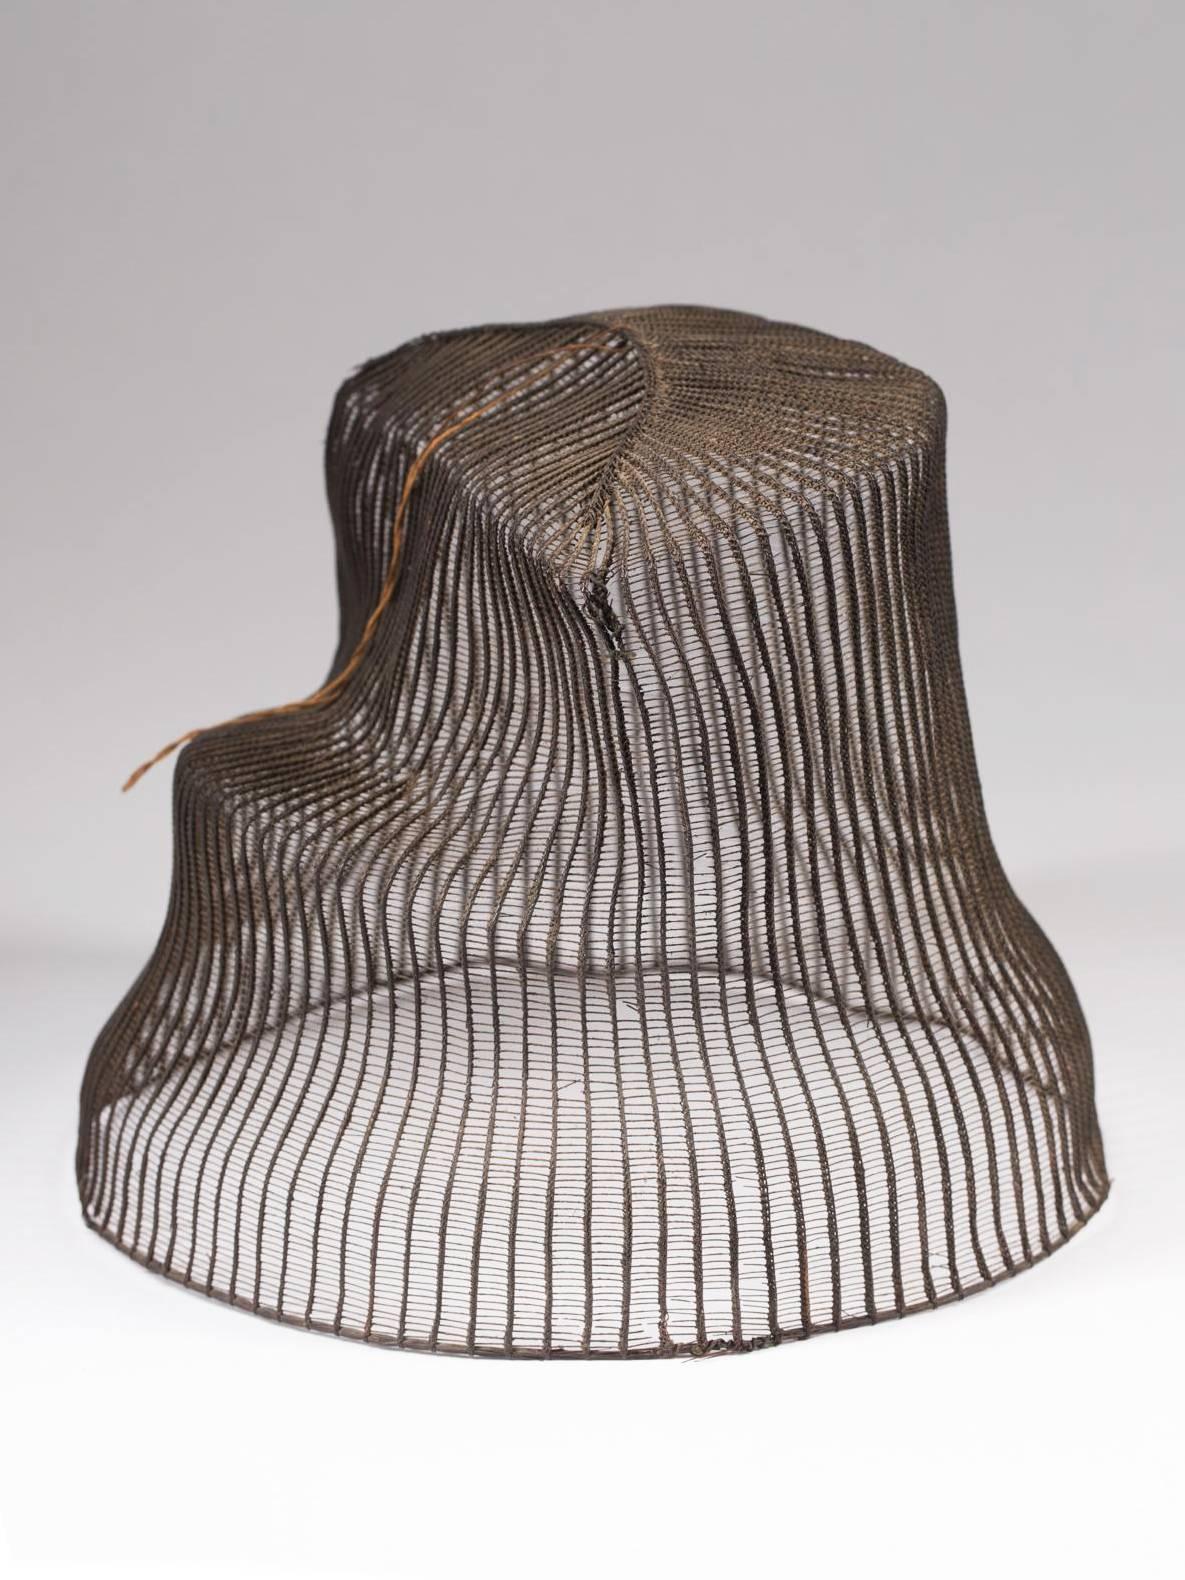 Late 19th century horse hair hat with original wood base, Korea

The tanggeon hat was worn by nobility, as well as men in the commercial and medical fields. It would cover the mangeon, which was a horse hair head band that would keep the hair in